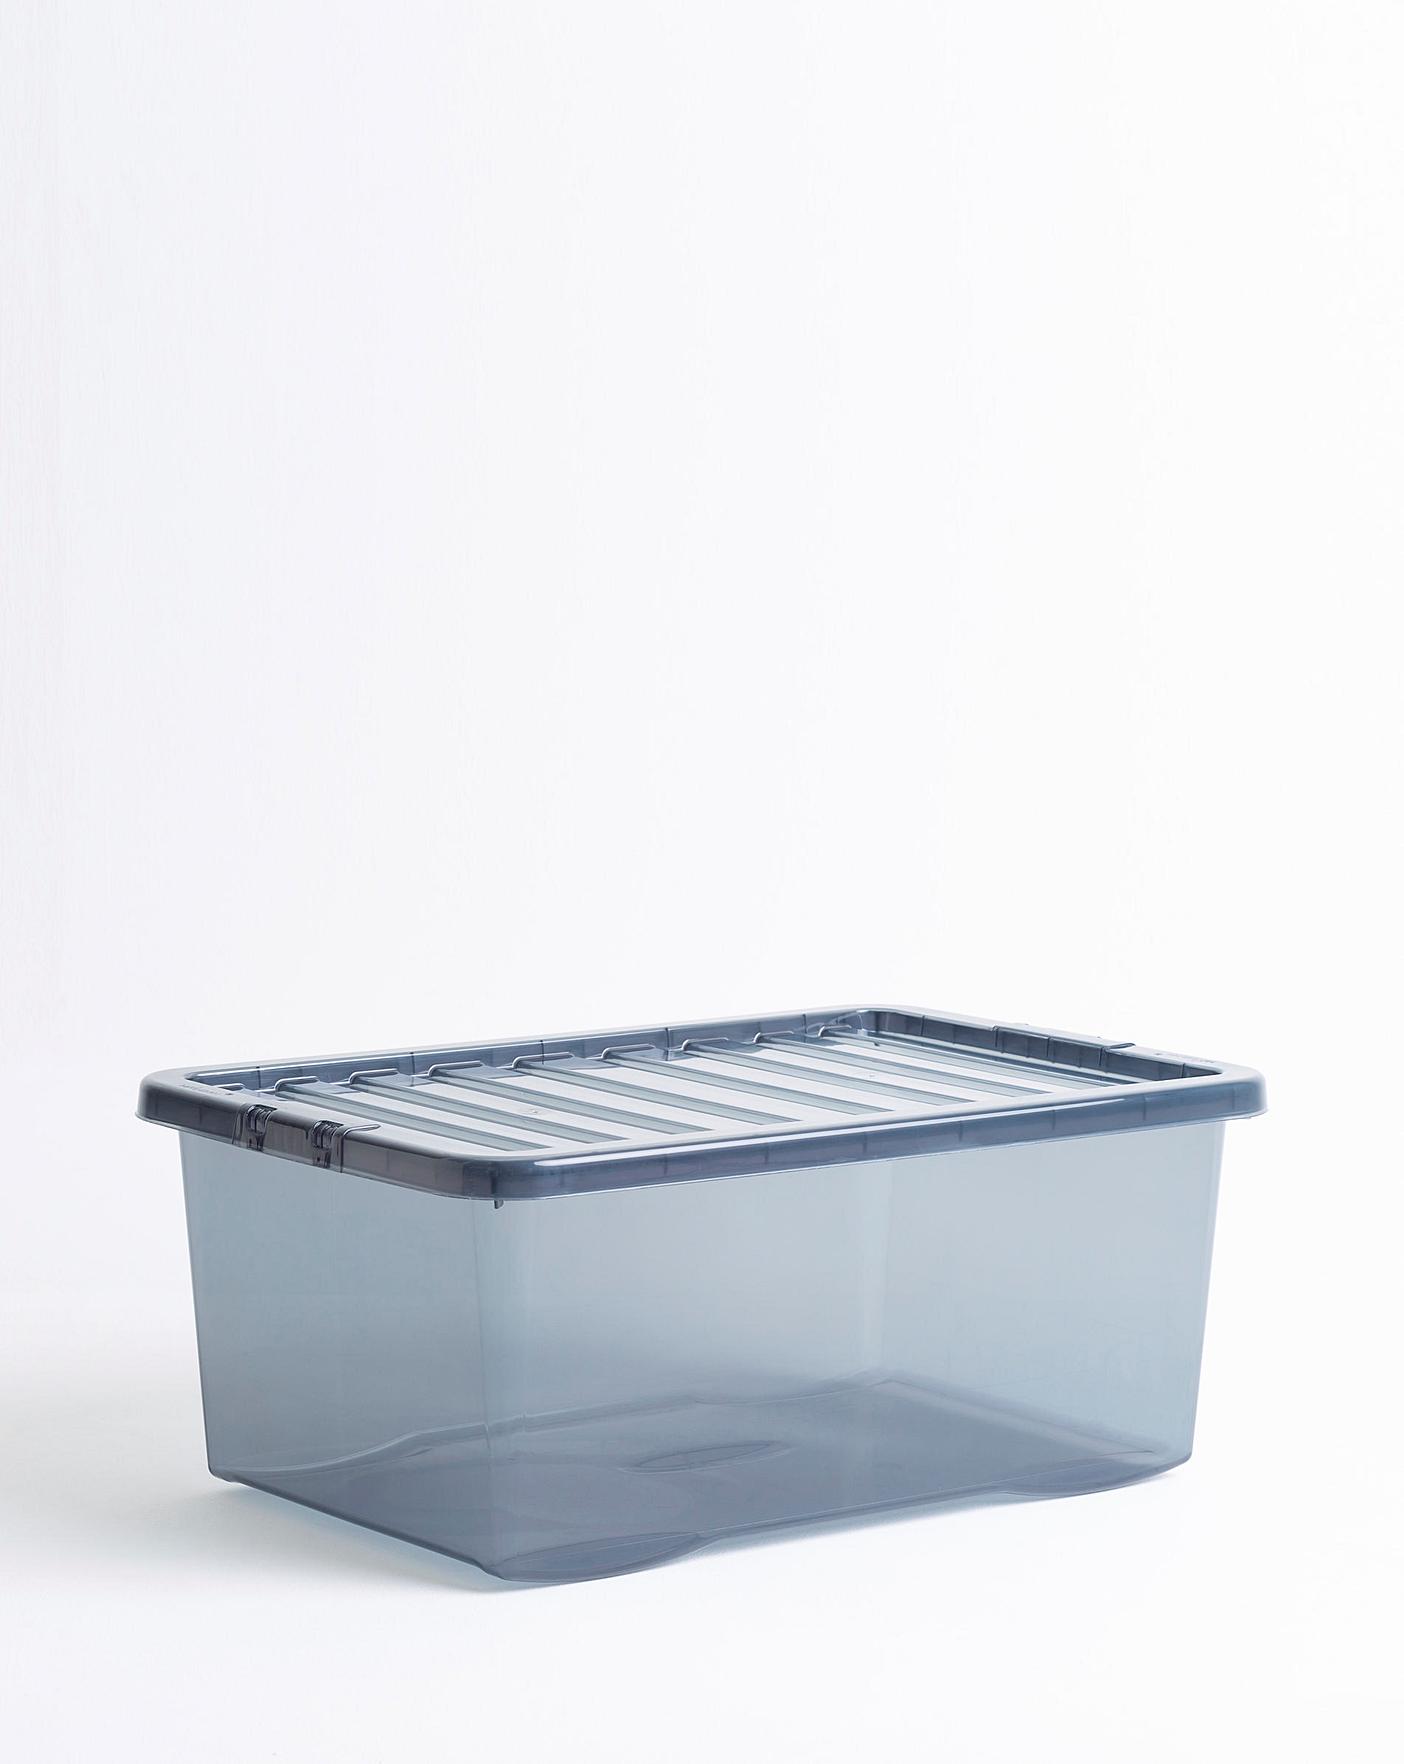 Buy 45L Wham Crystal Storage Box with Lid Clear Plastic